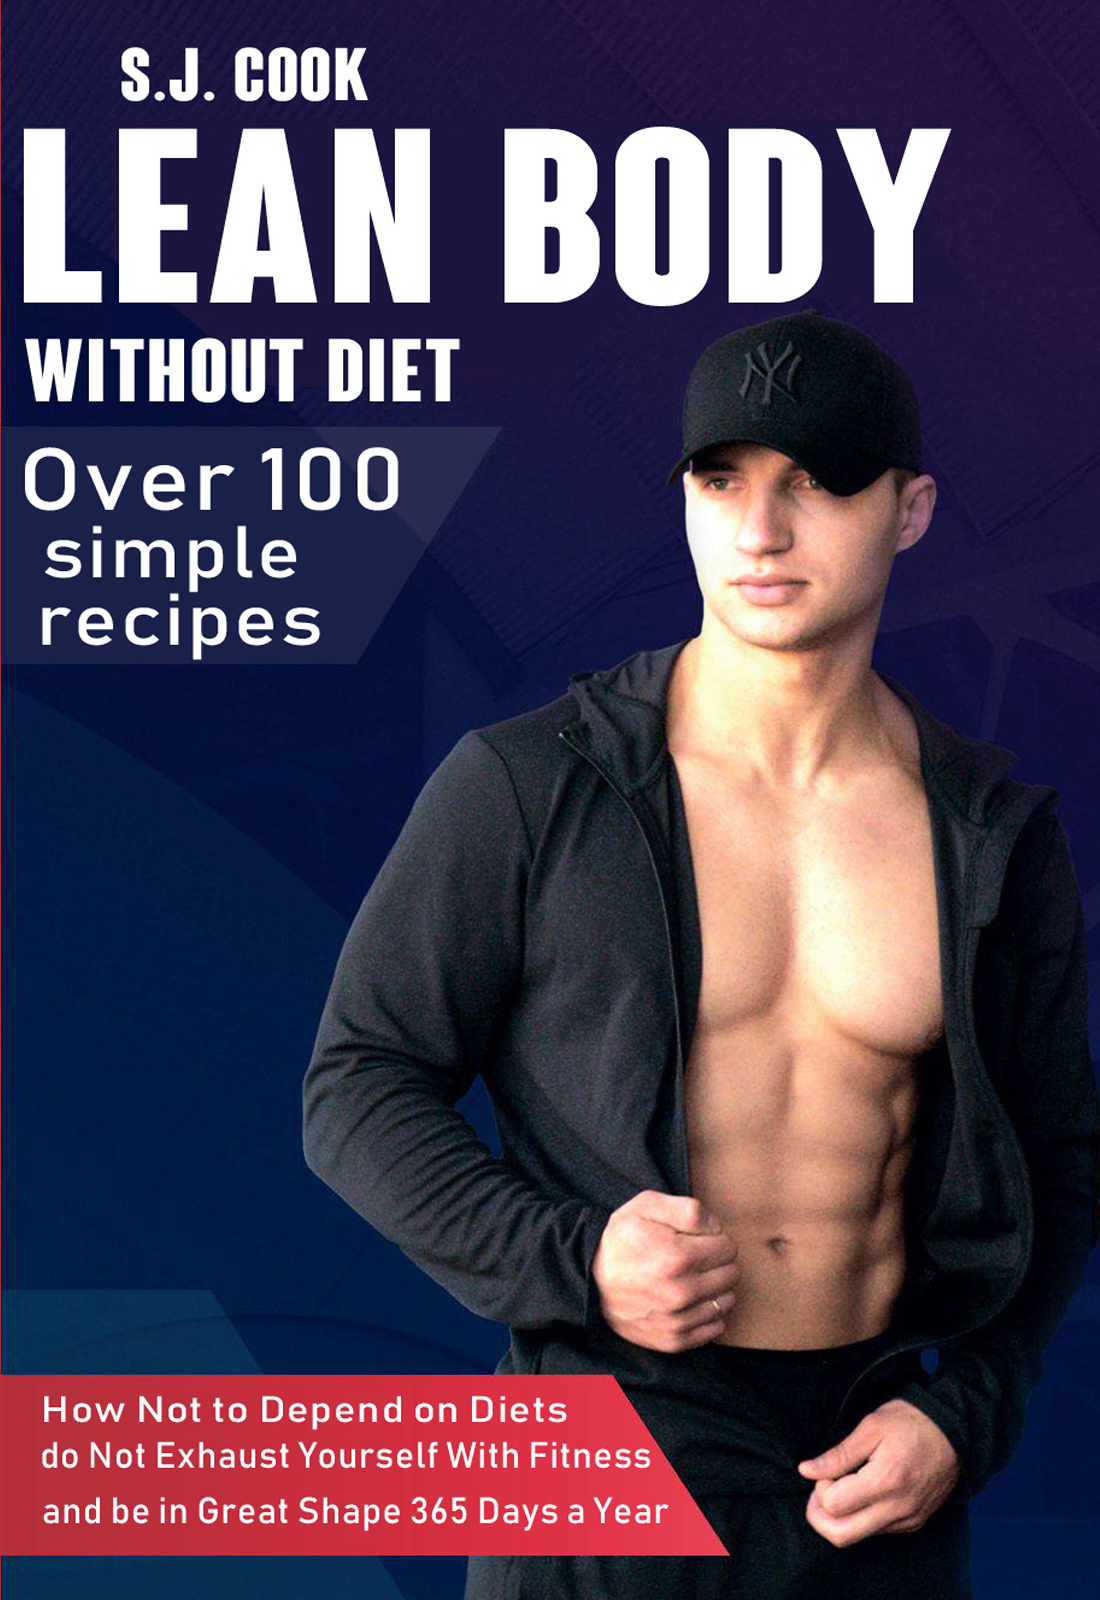 FREE: LEAN BODY WITHOUT DIET: Over 100 + Easy Recipes / How Not to Depend on Diets, do Not Exhaust Yourself With Fitness and be in Great Shape 365 Days a Year by S.J. Cook